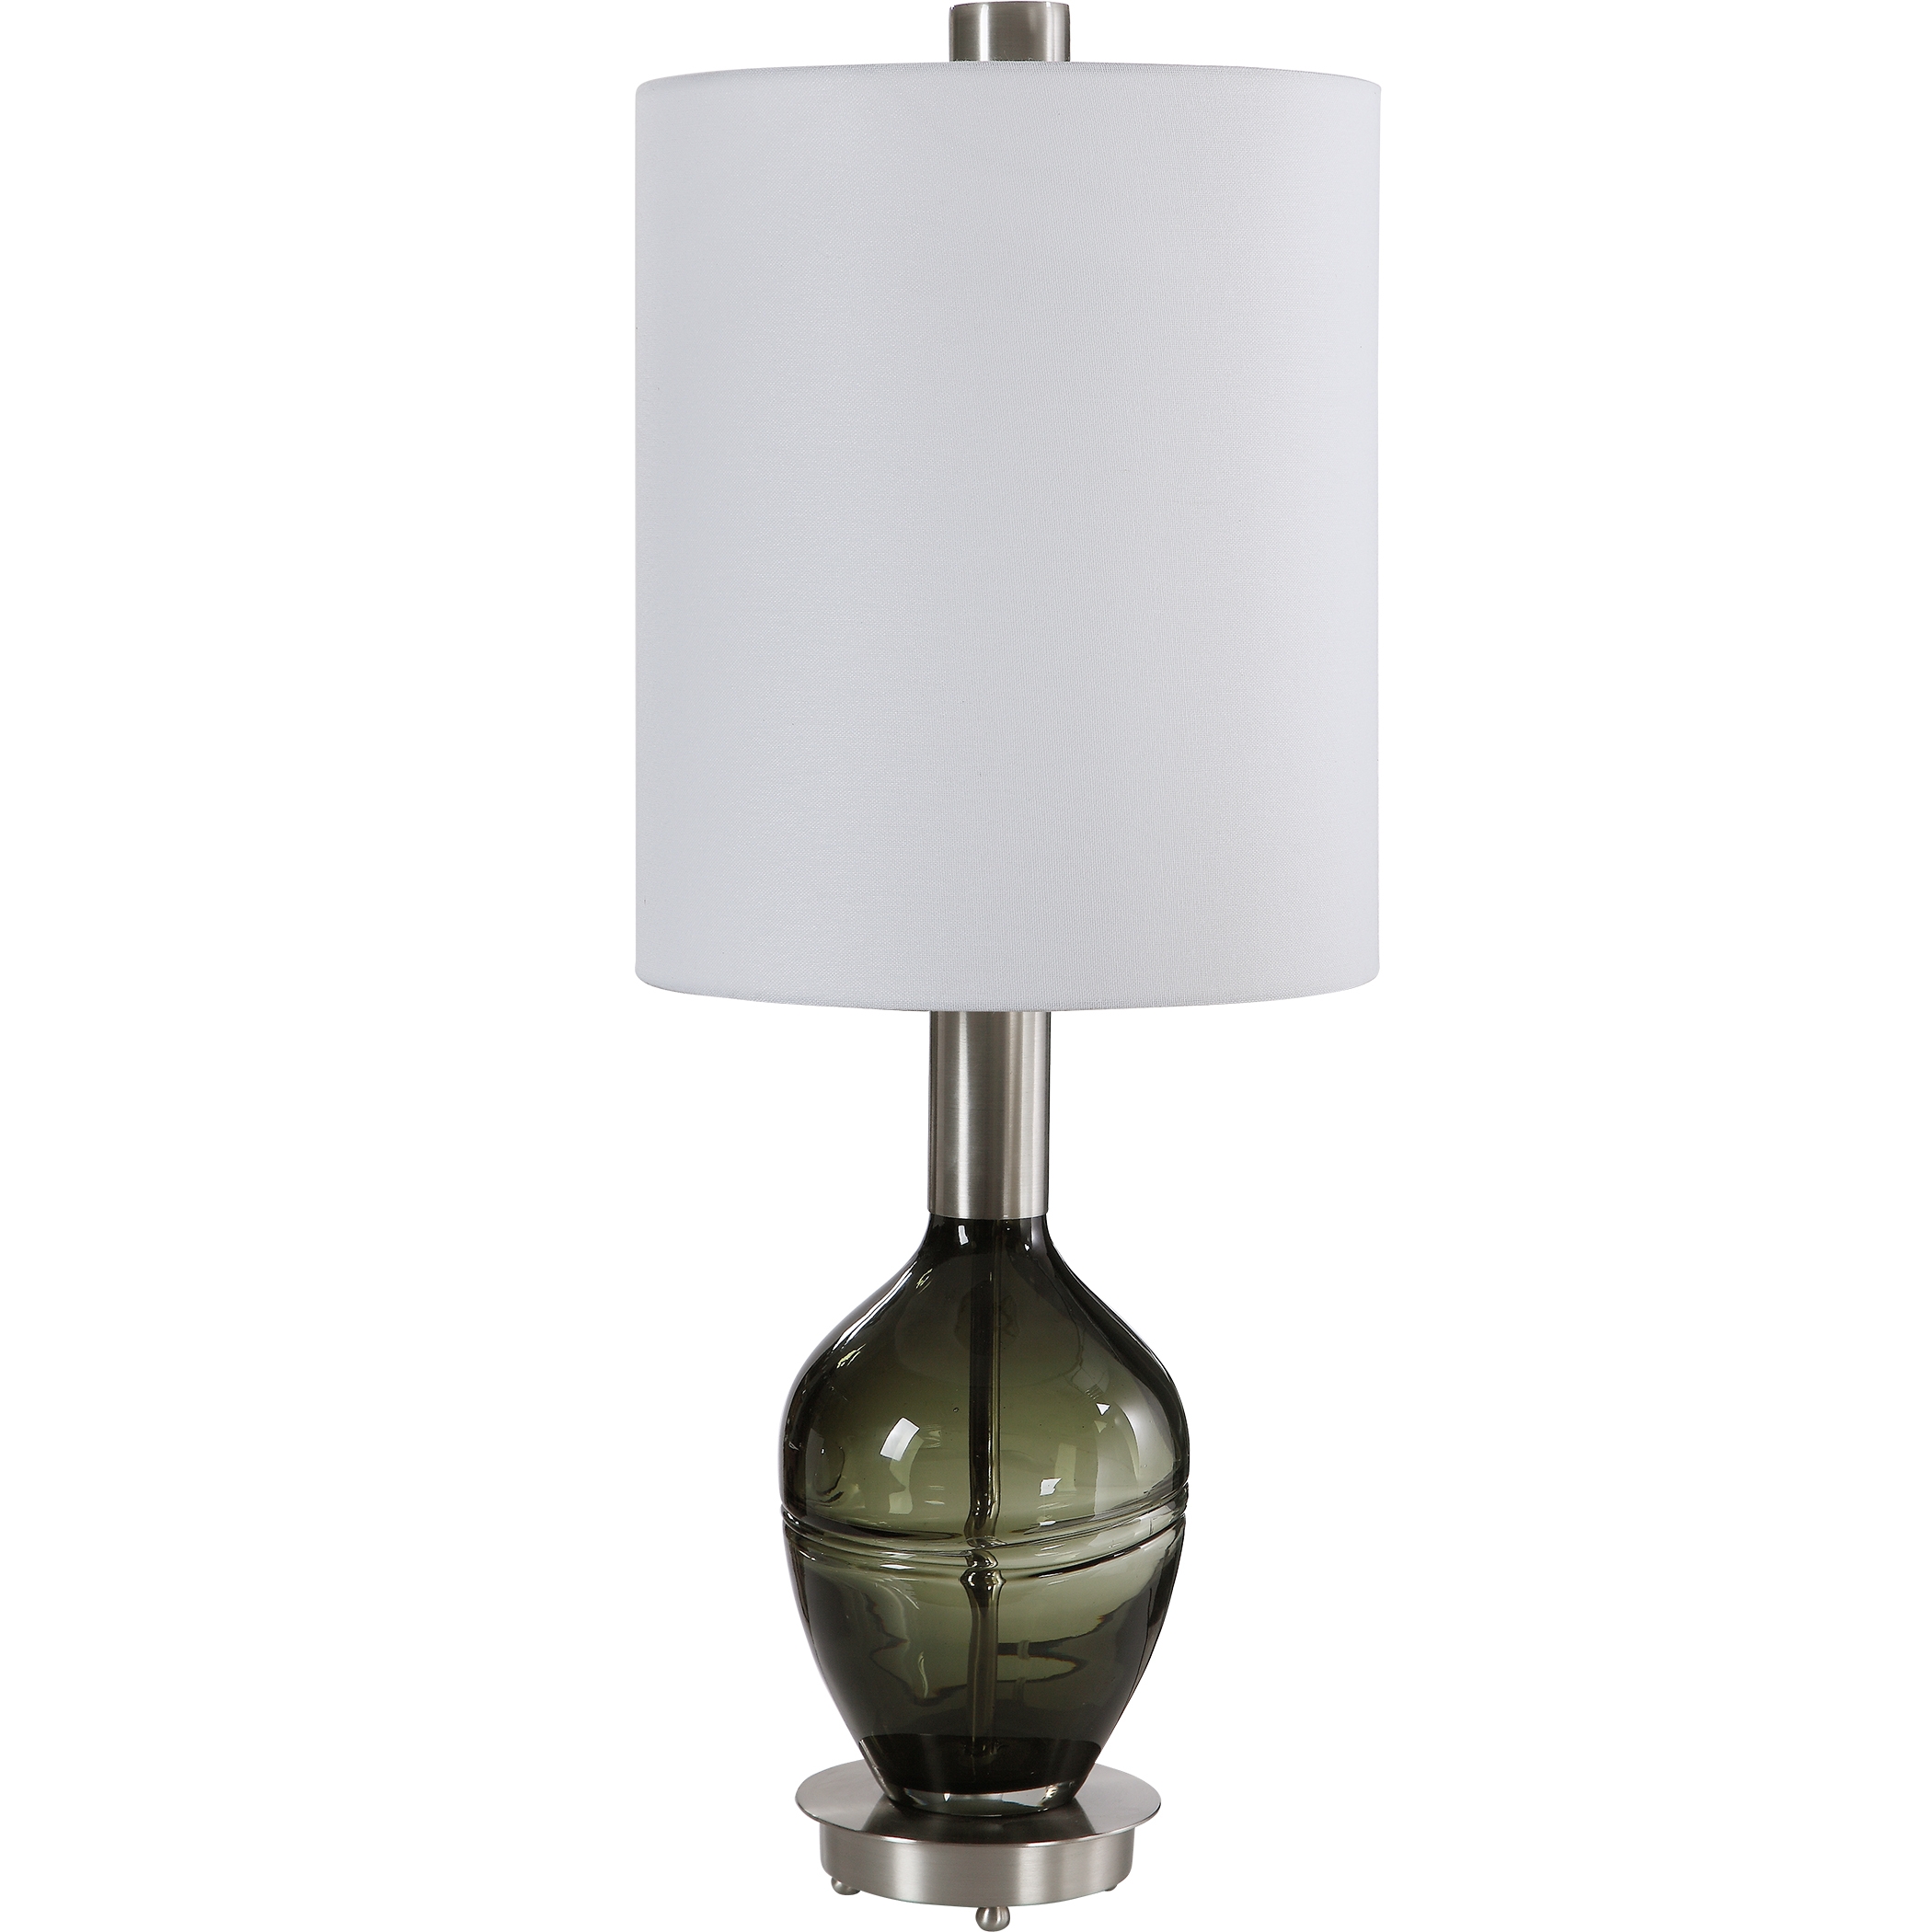 Aderia Sage Green Accent Lamp - Image 6